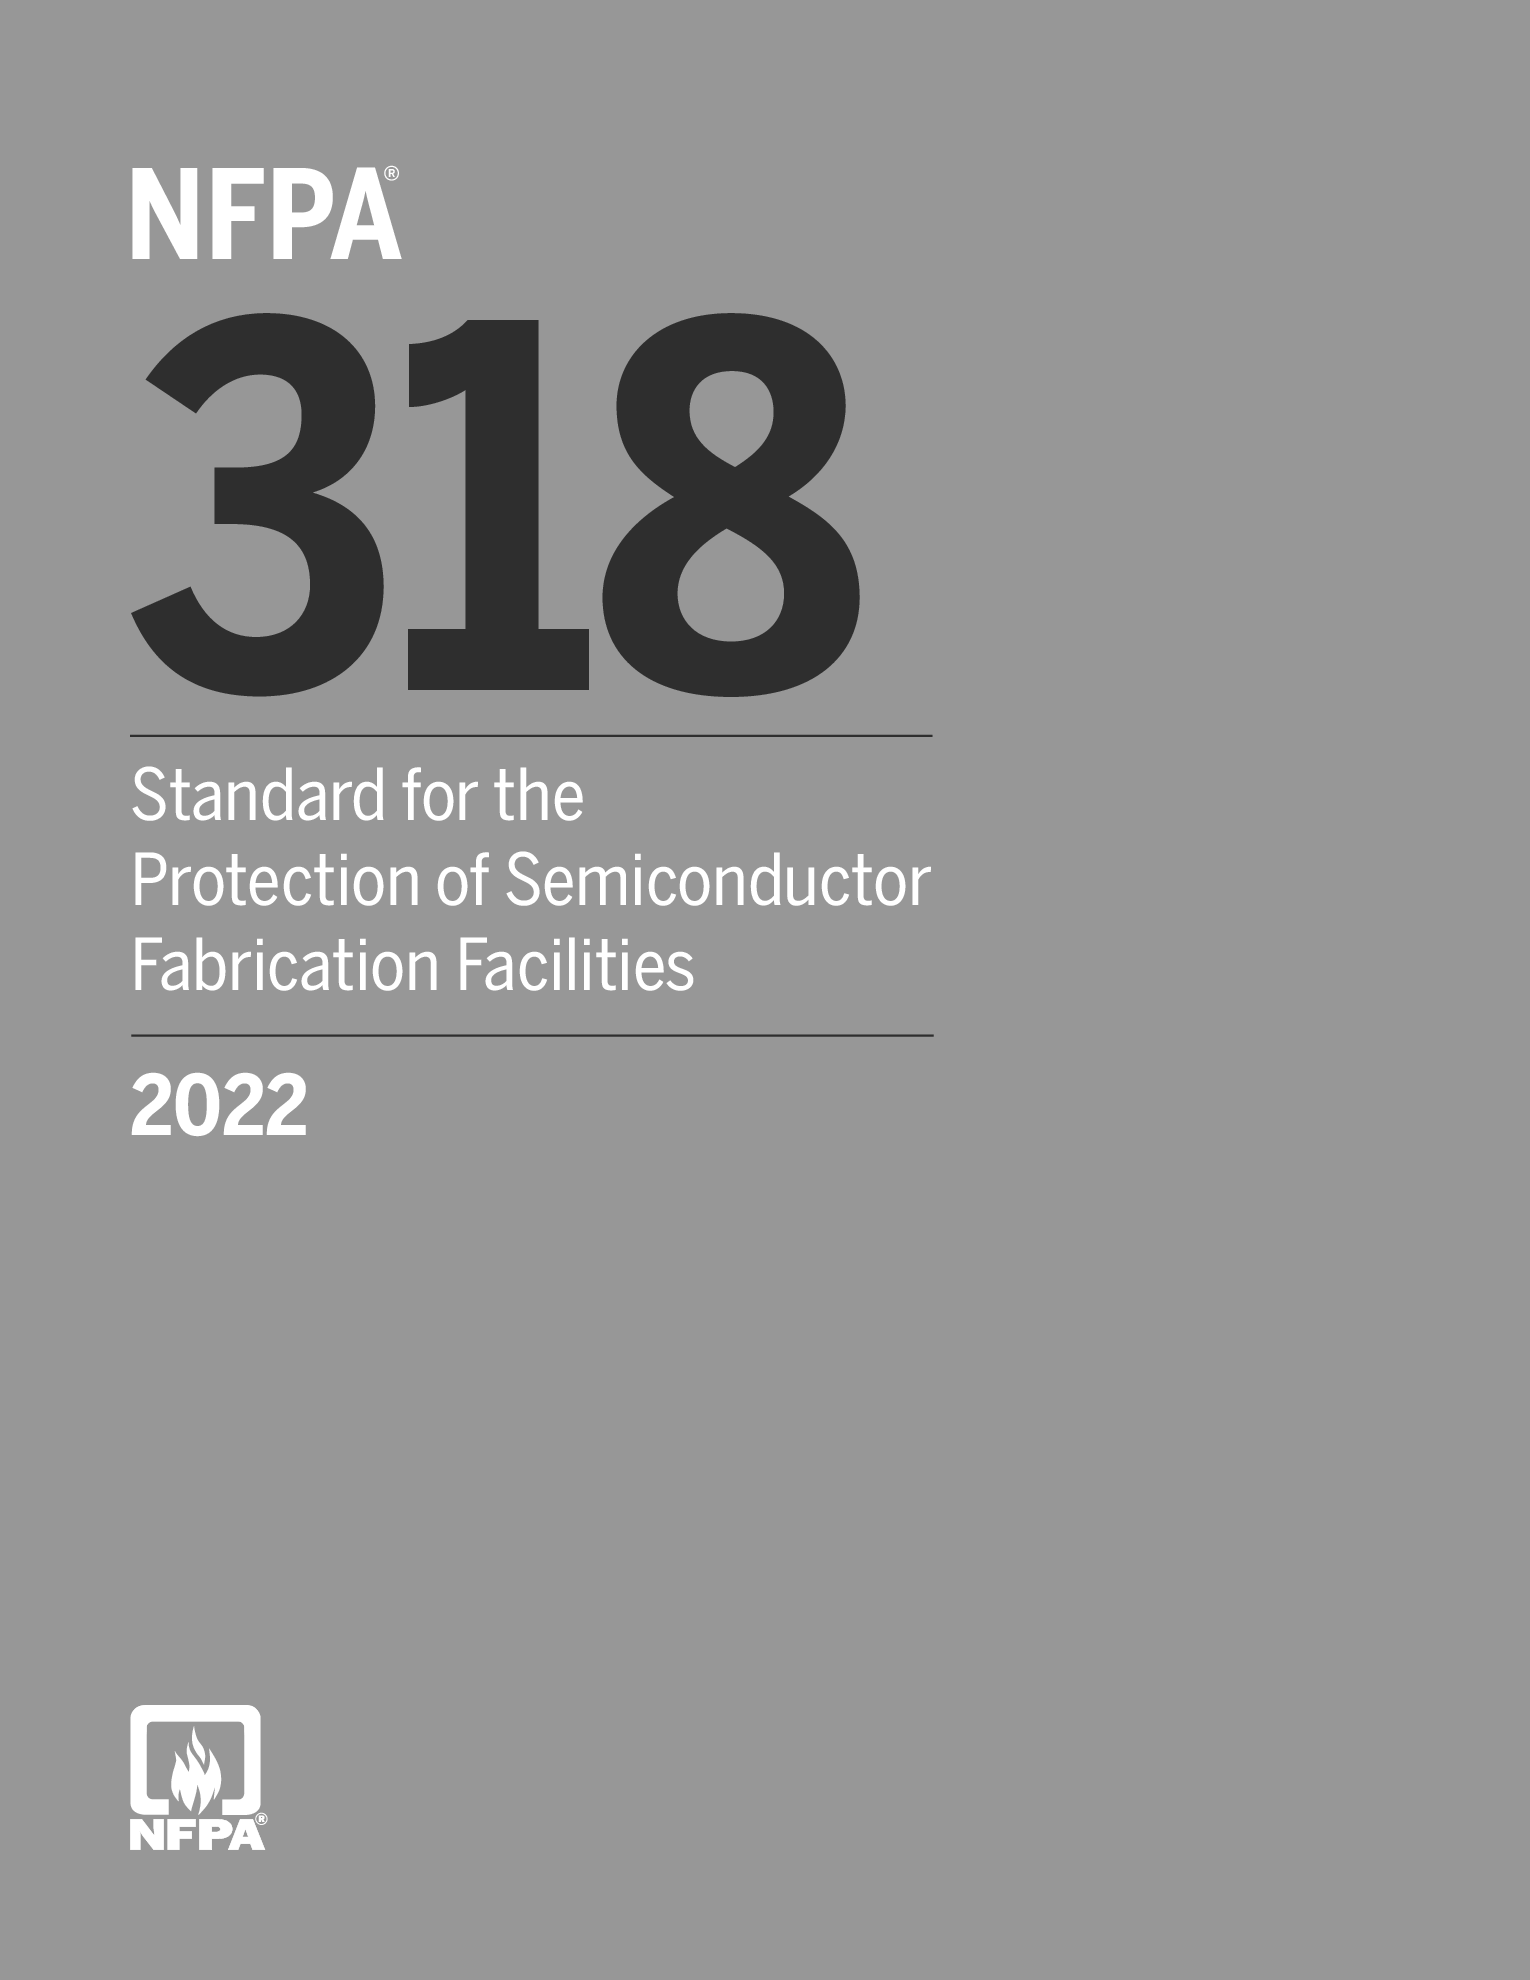 《Standard for the Protection of Semiconductor Fabrication Facilities》（NFPA318-2022）【美国消防协会标准】【附完整PDF版下载】